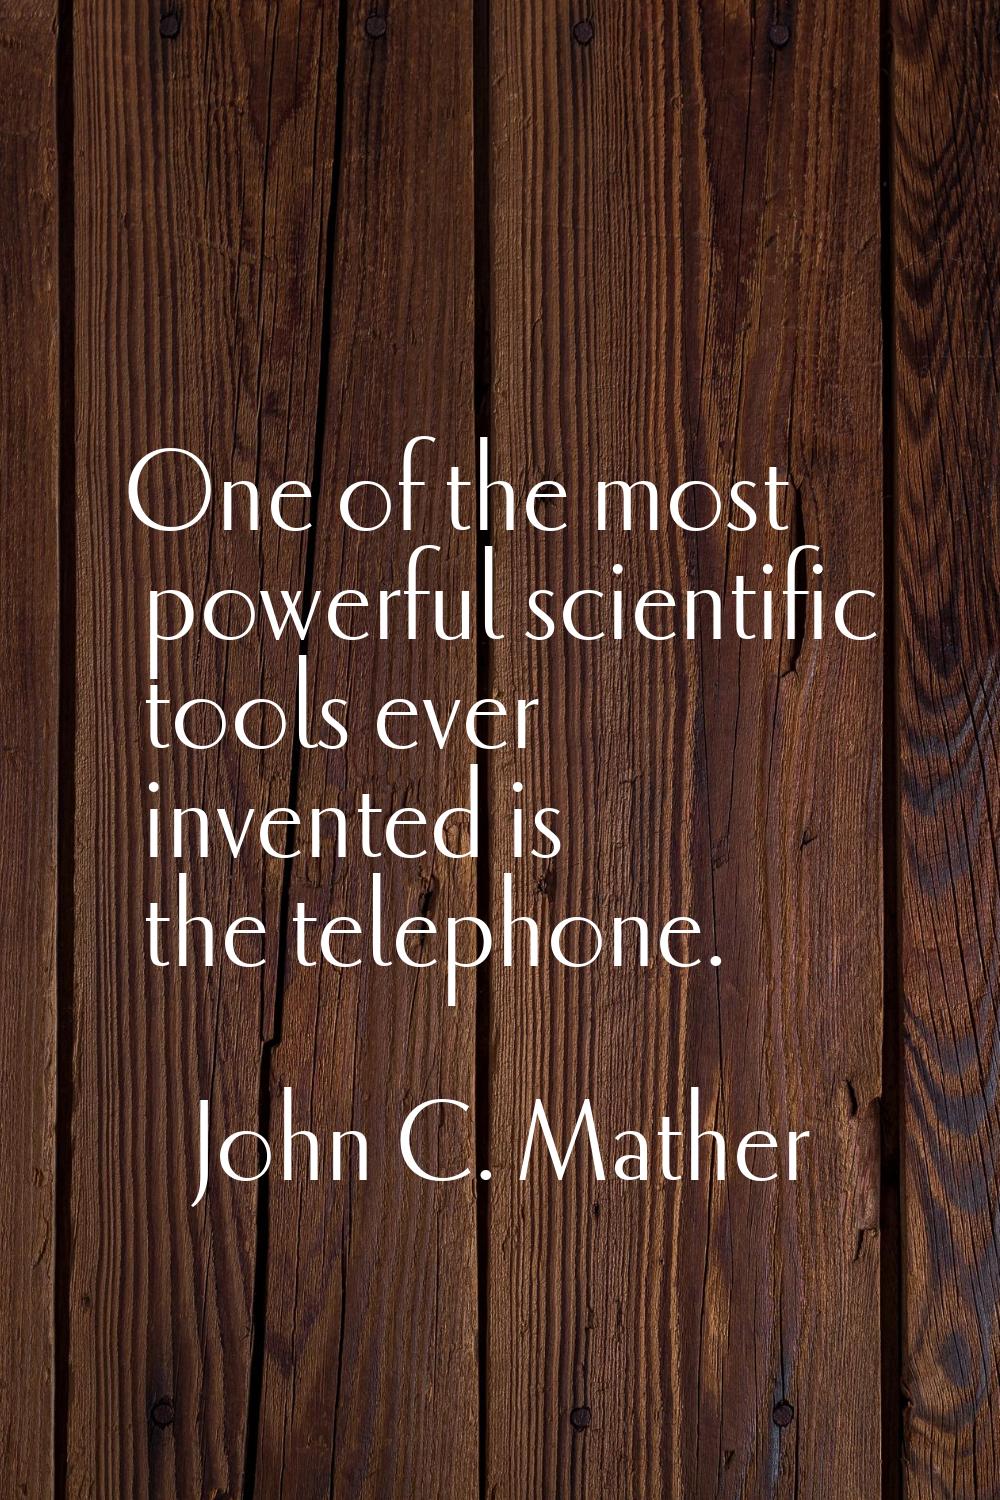 One of the most powerful scientific tools ever invented is the telephone.